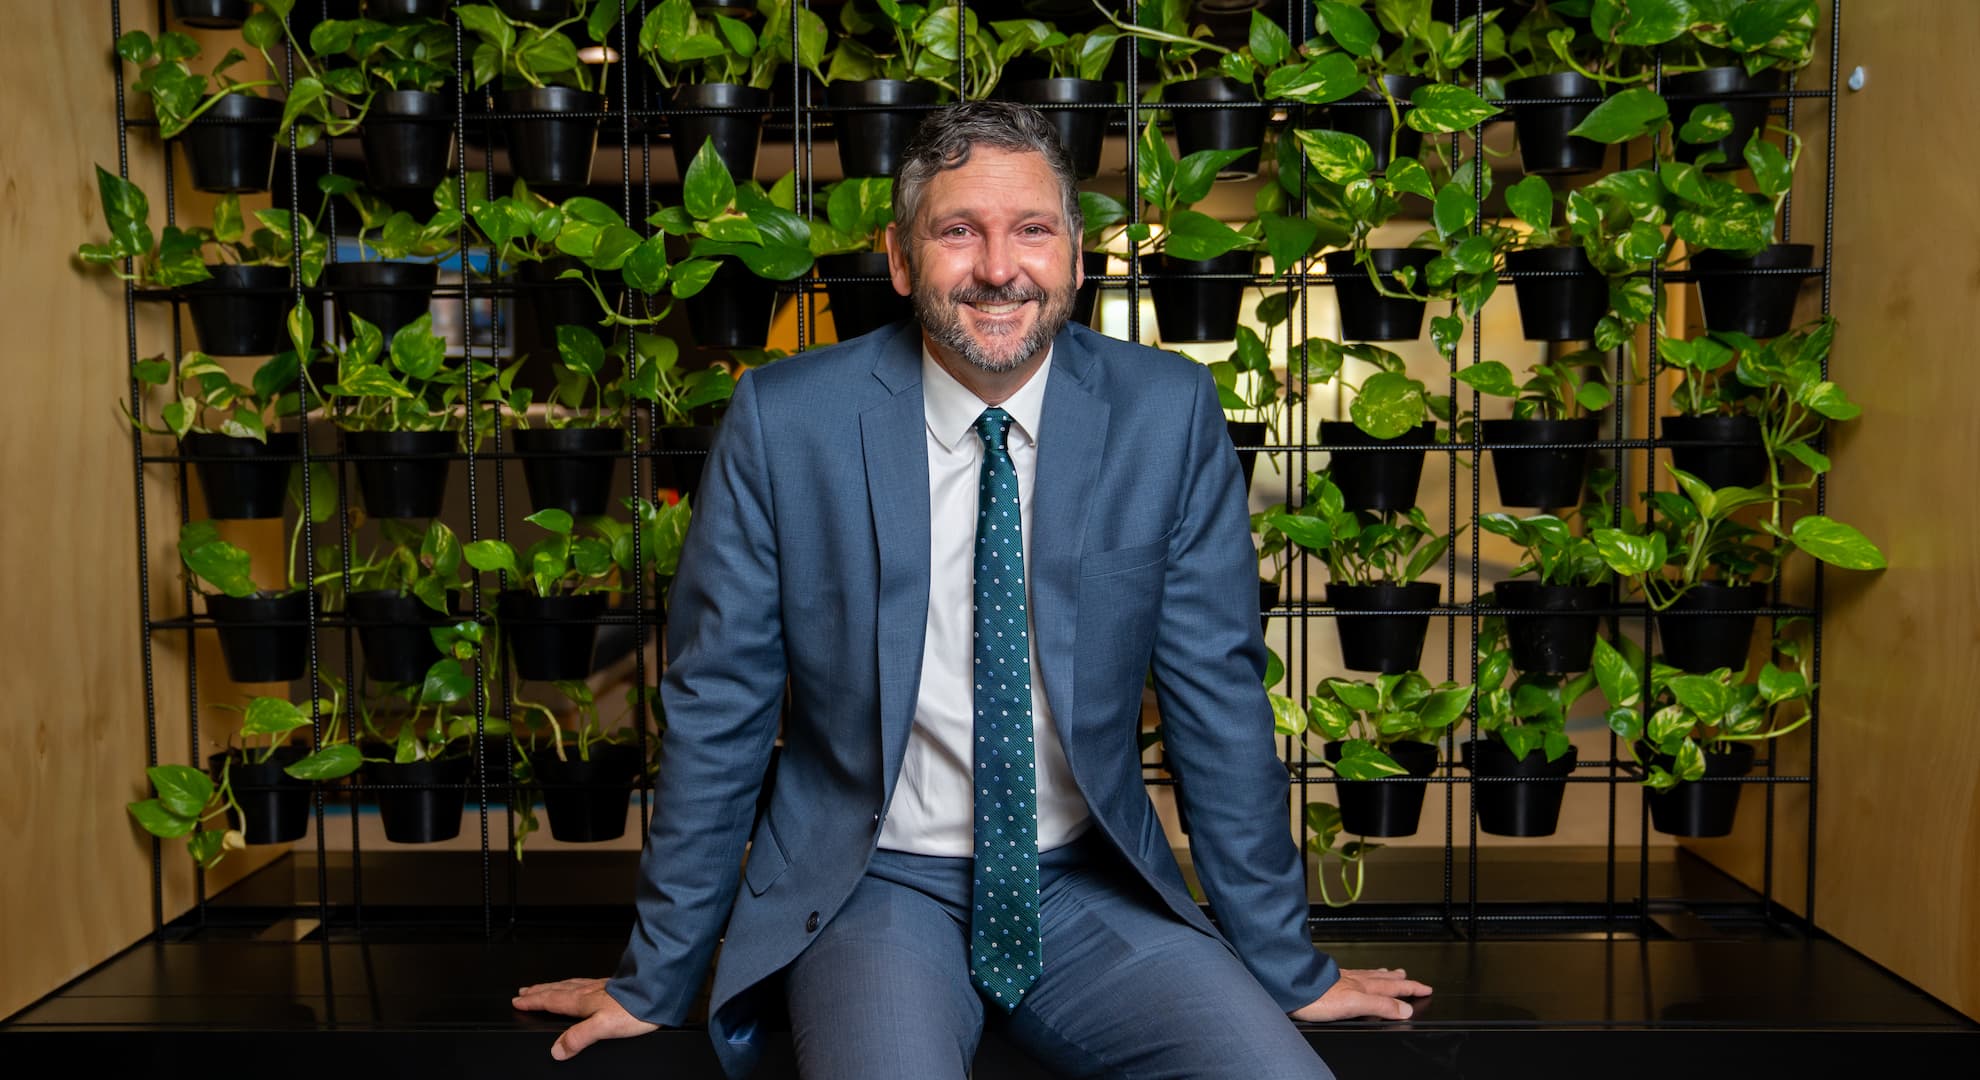 Professor with a beard in suit sitting on black bench in front of wall of small potted greenery